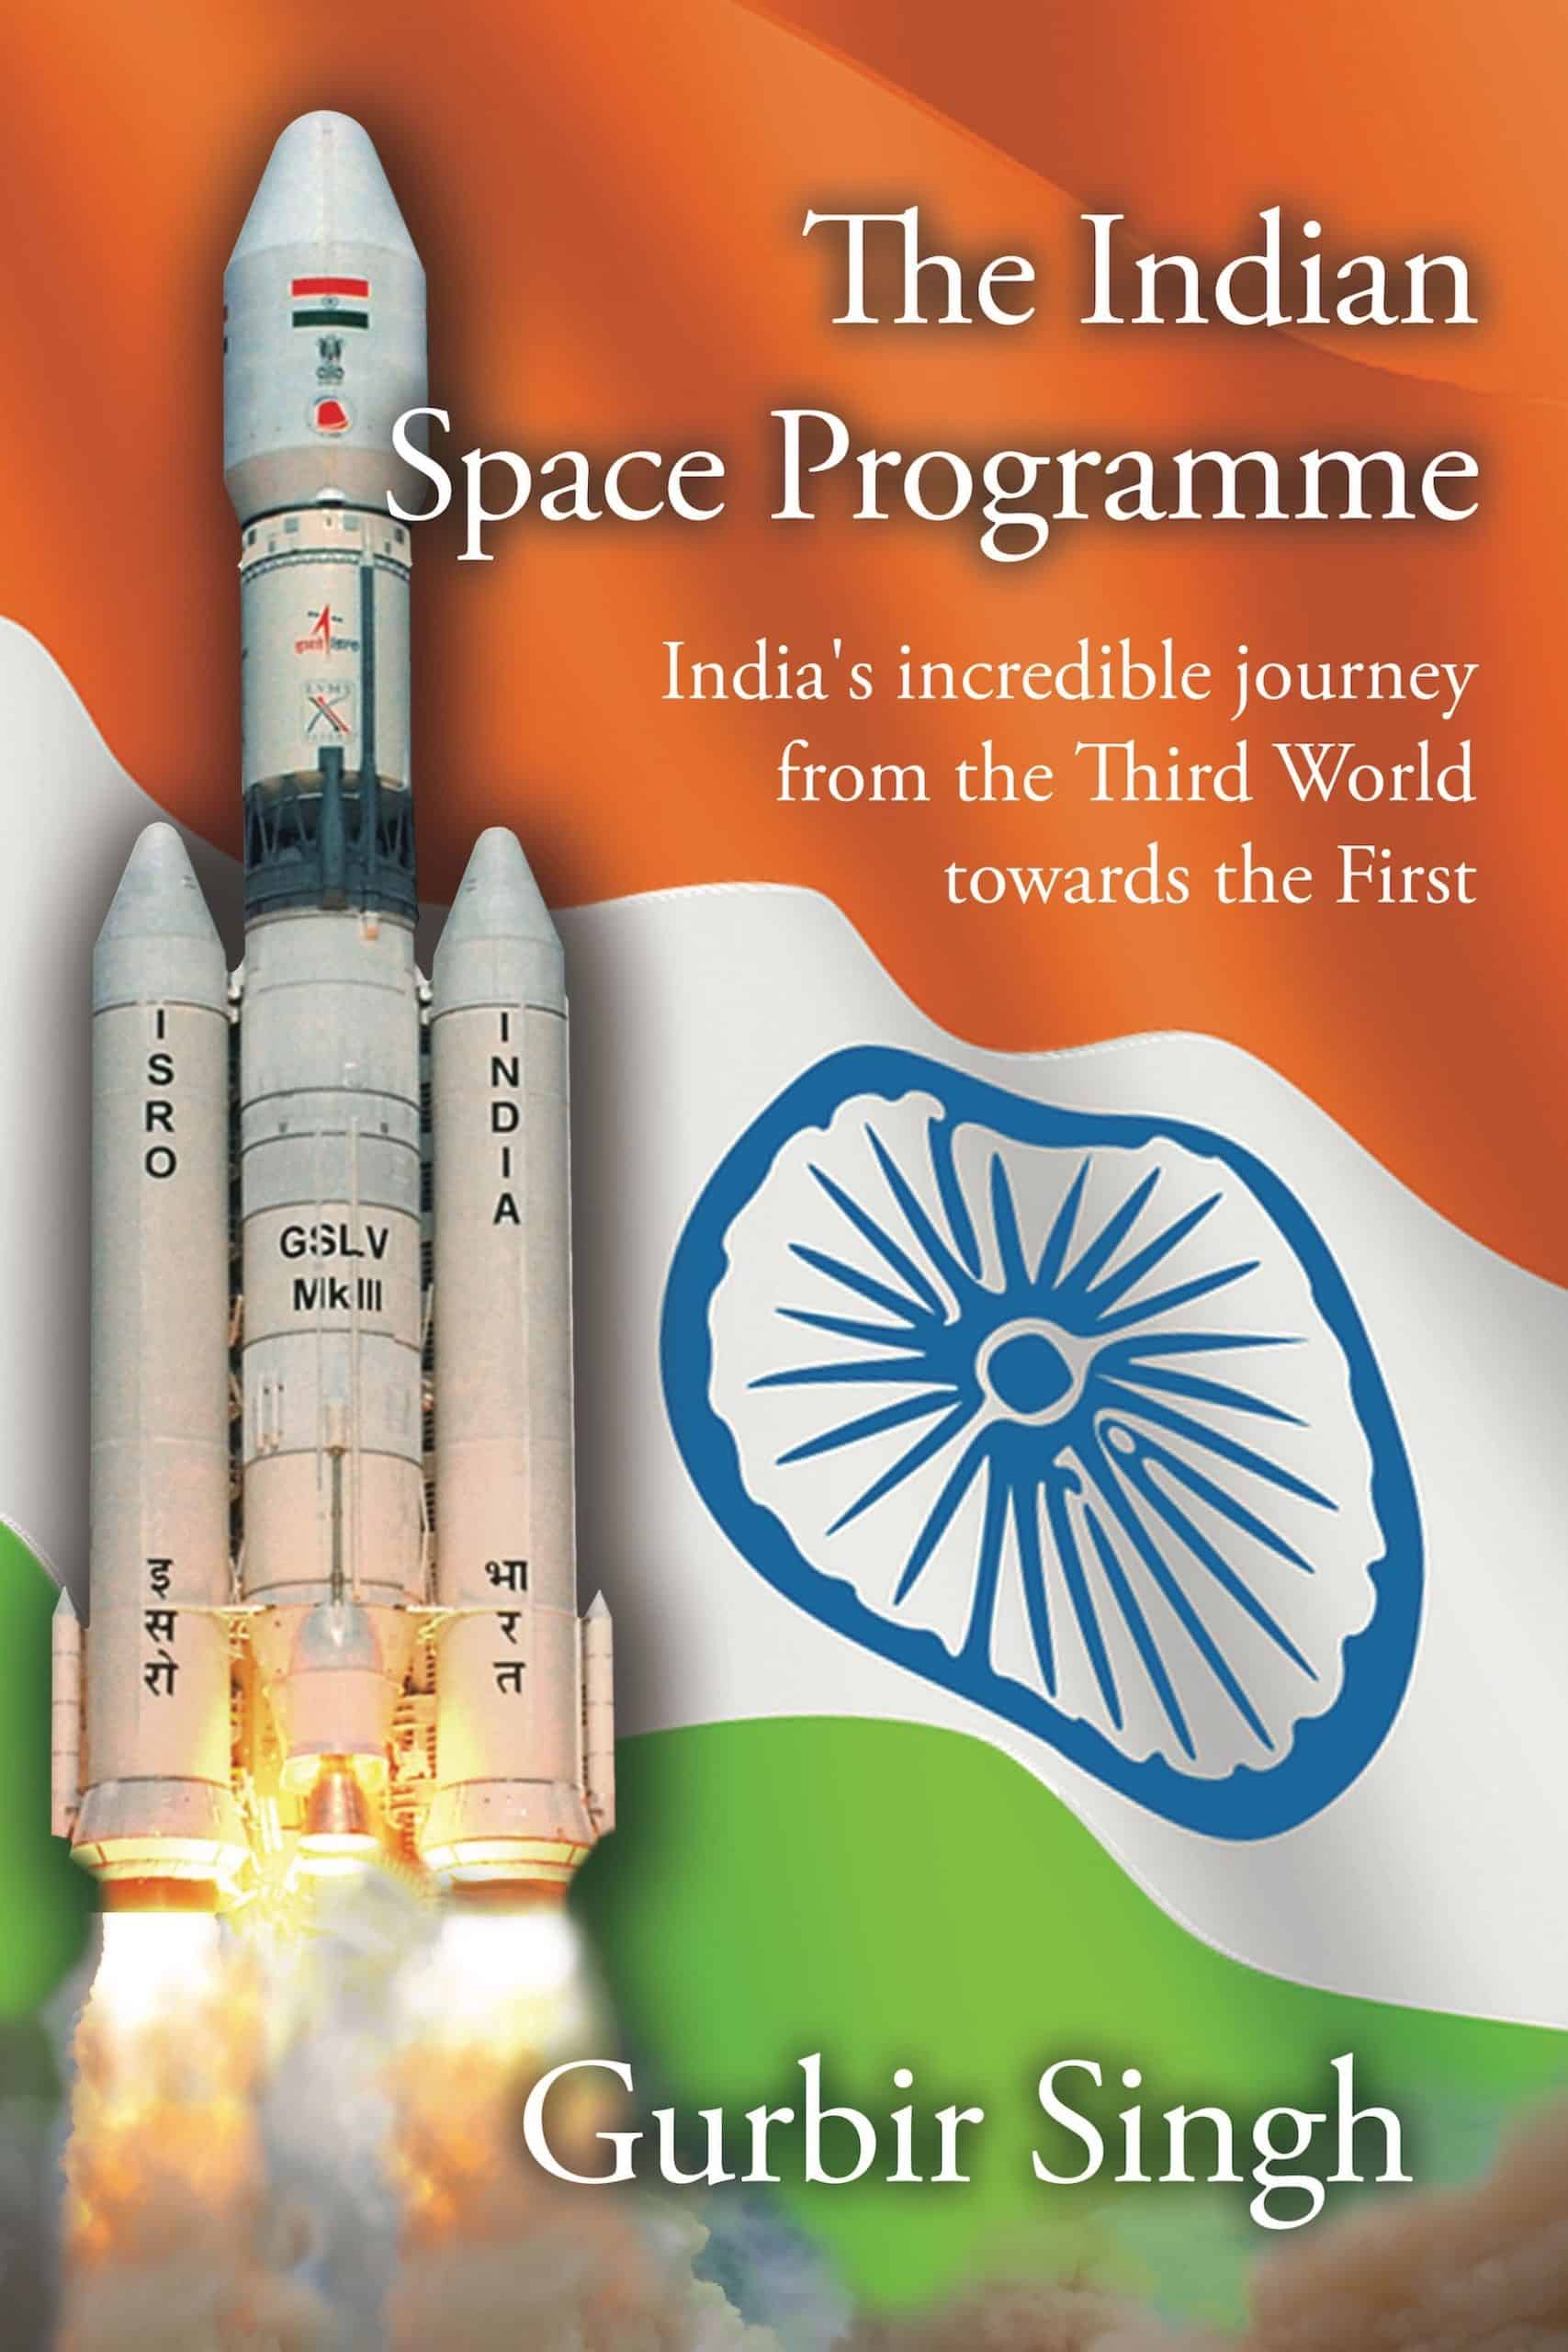 Indian-Space-Program-Cover-6x9-1-scaled.jpg